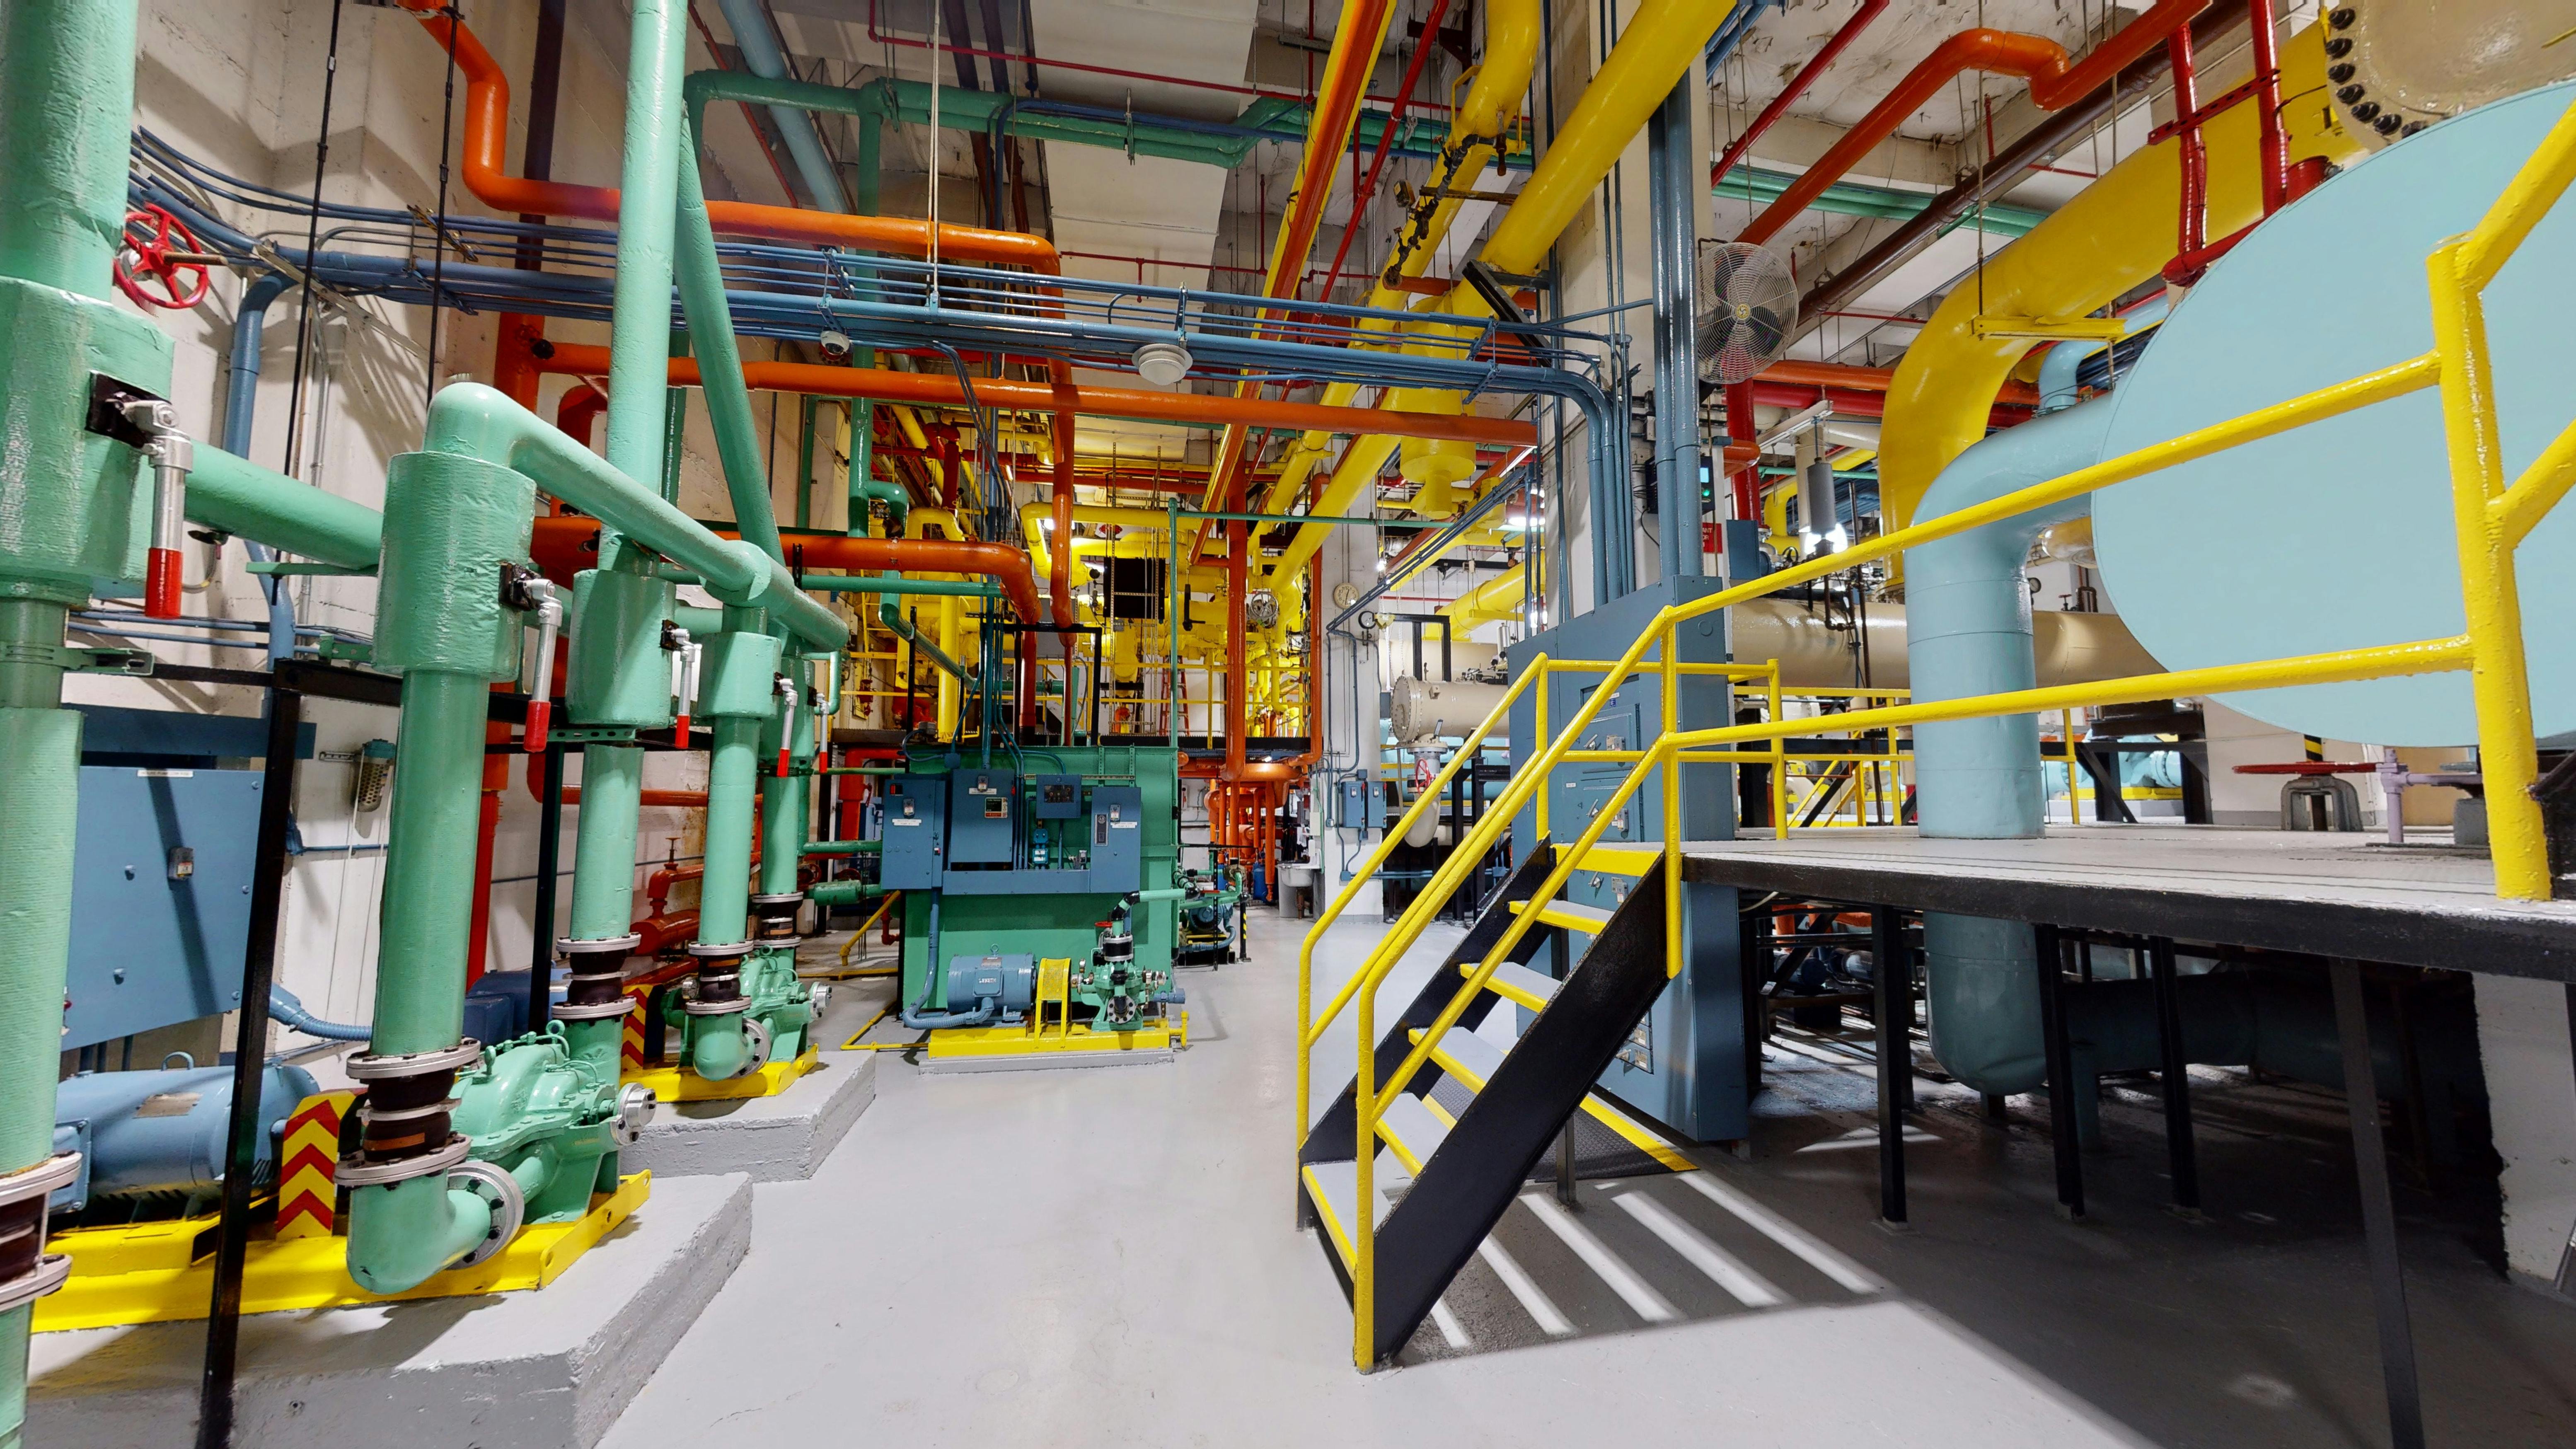 A clean and colorful engine room of a large skyscraper is visibly captured and displayed with Aetos Operate.